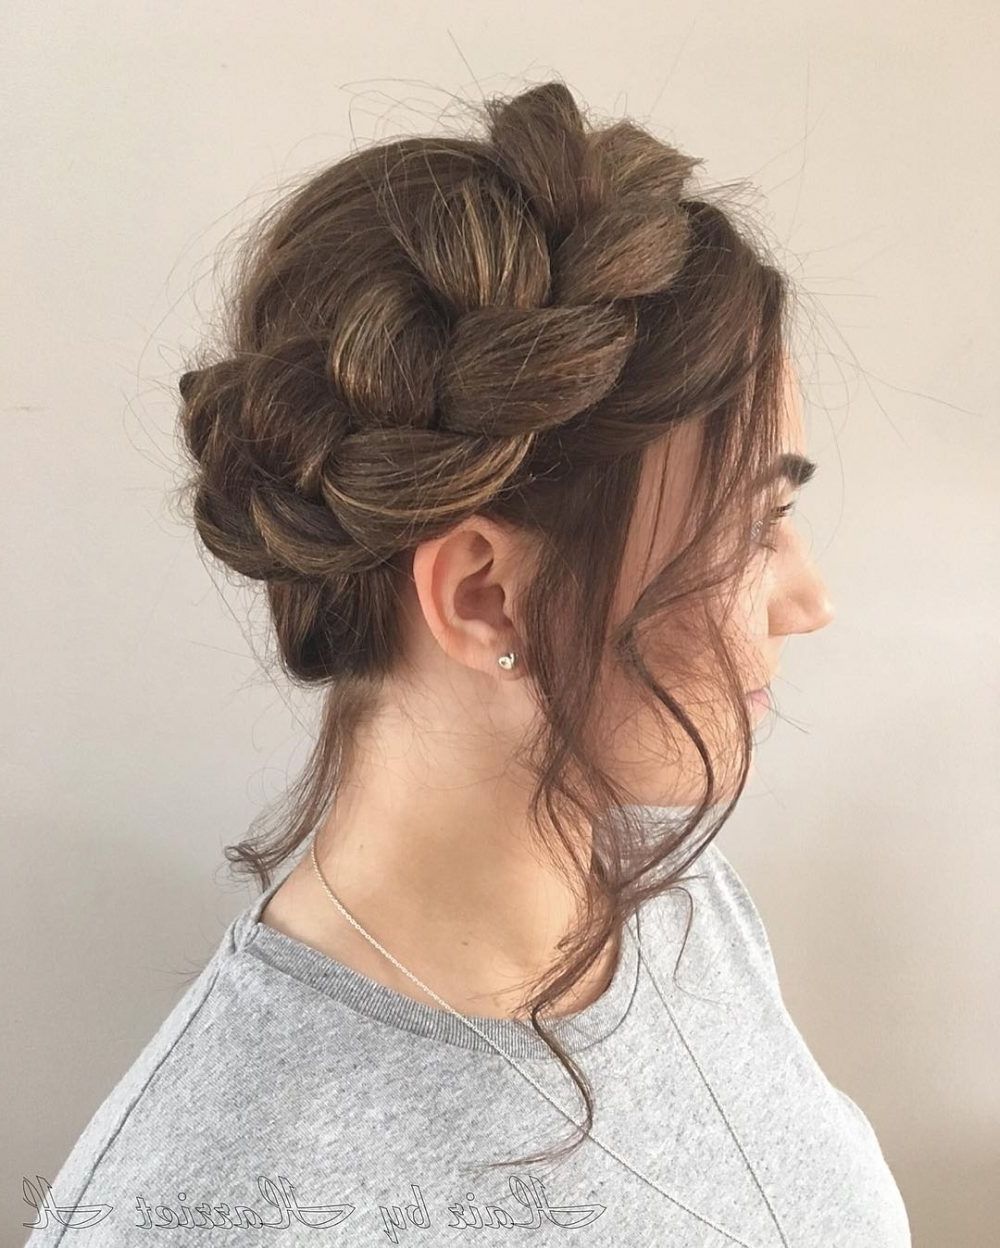 26 Gorgeous Braided Updos You Must Try With Braided Updo Hairstyles (View 7 of 15)